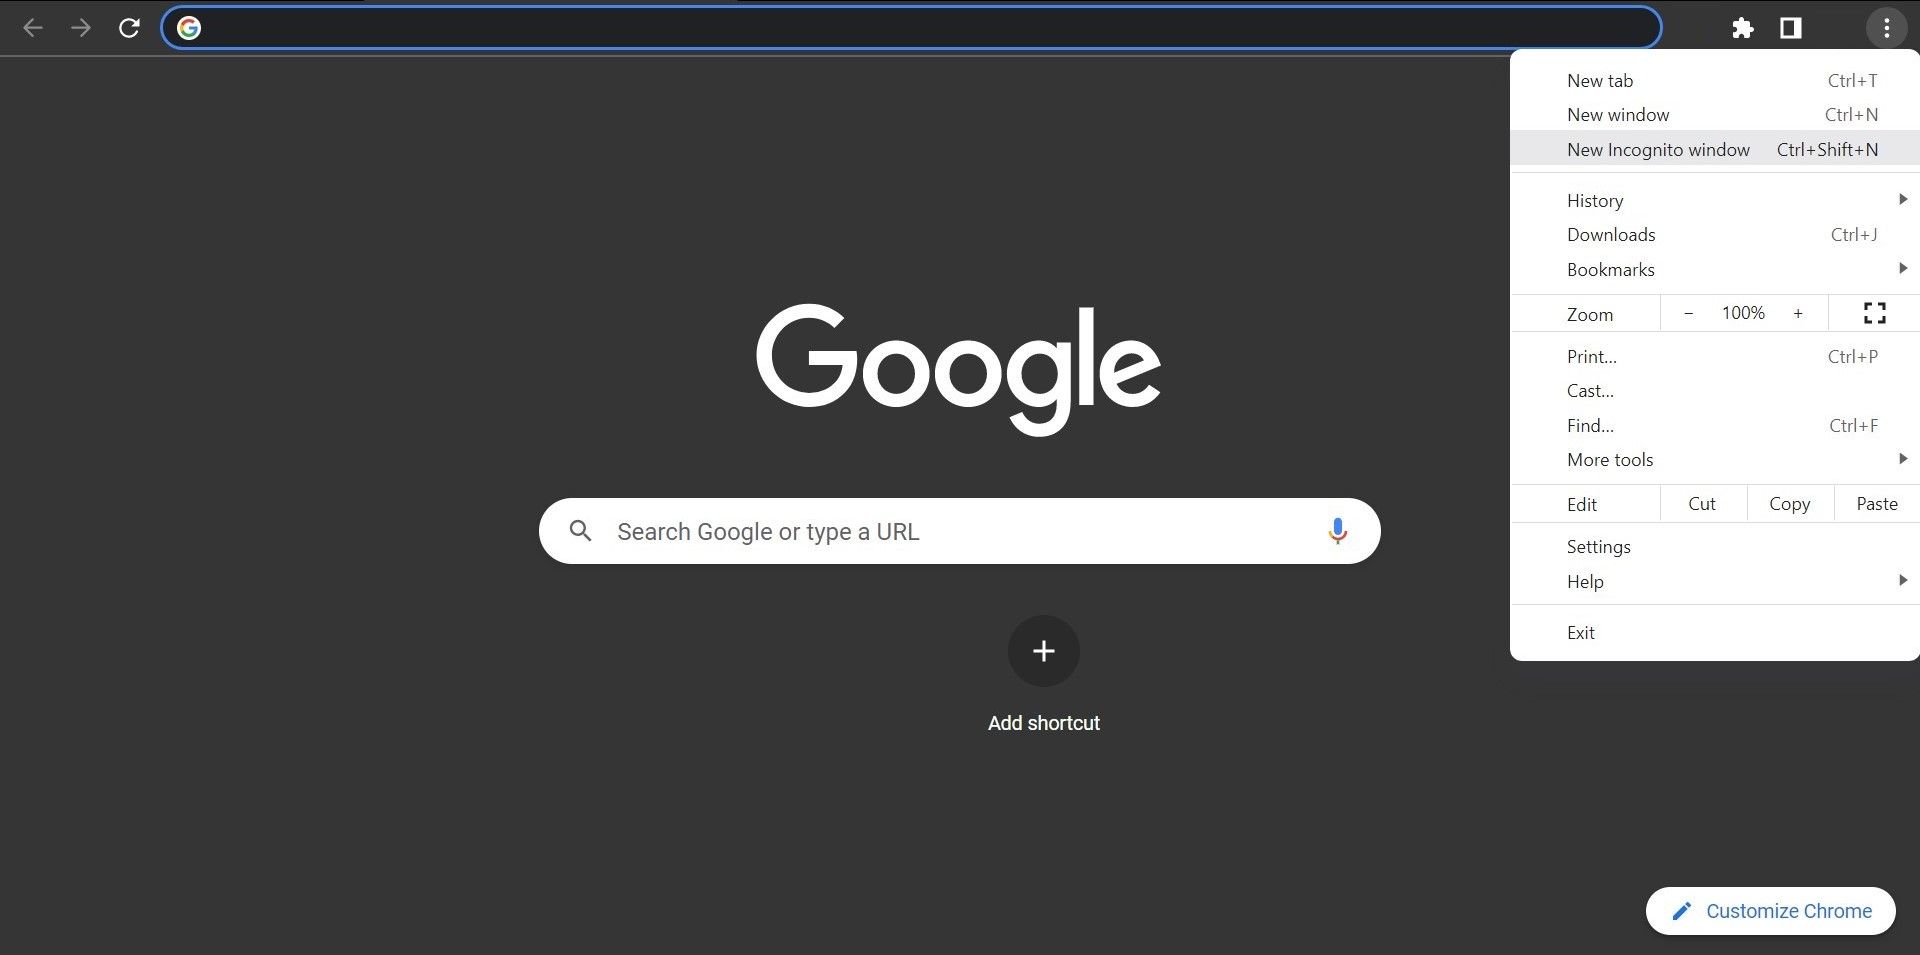 Open a new incognito window by clicking the three vertical dots in the top right corner of Chrome